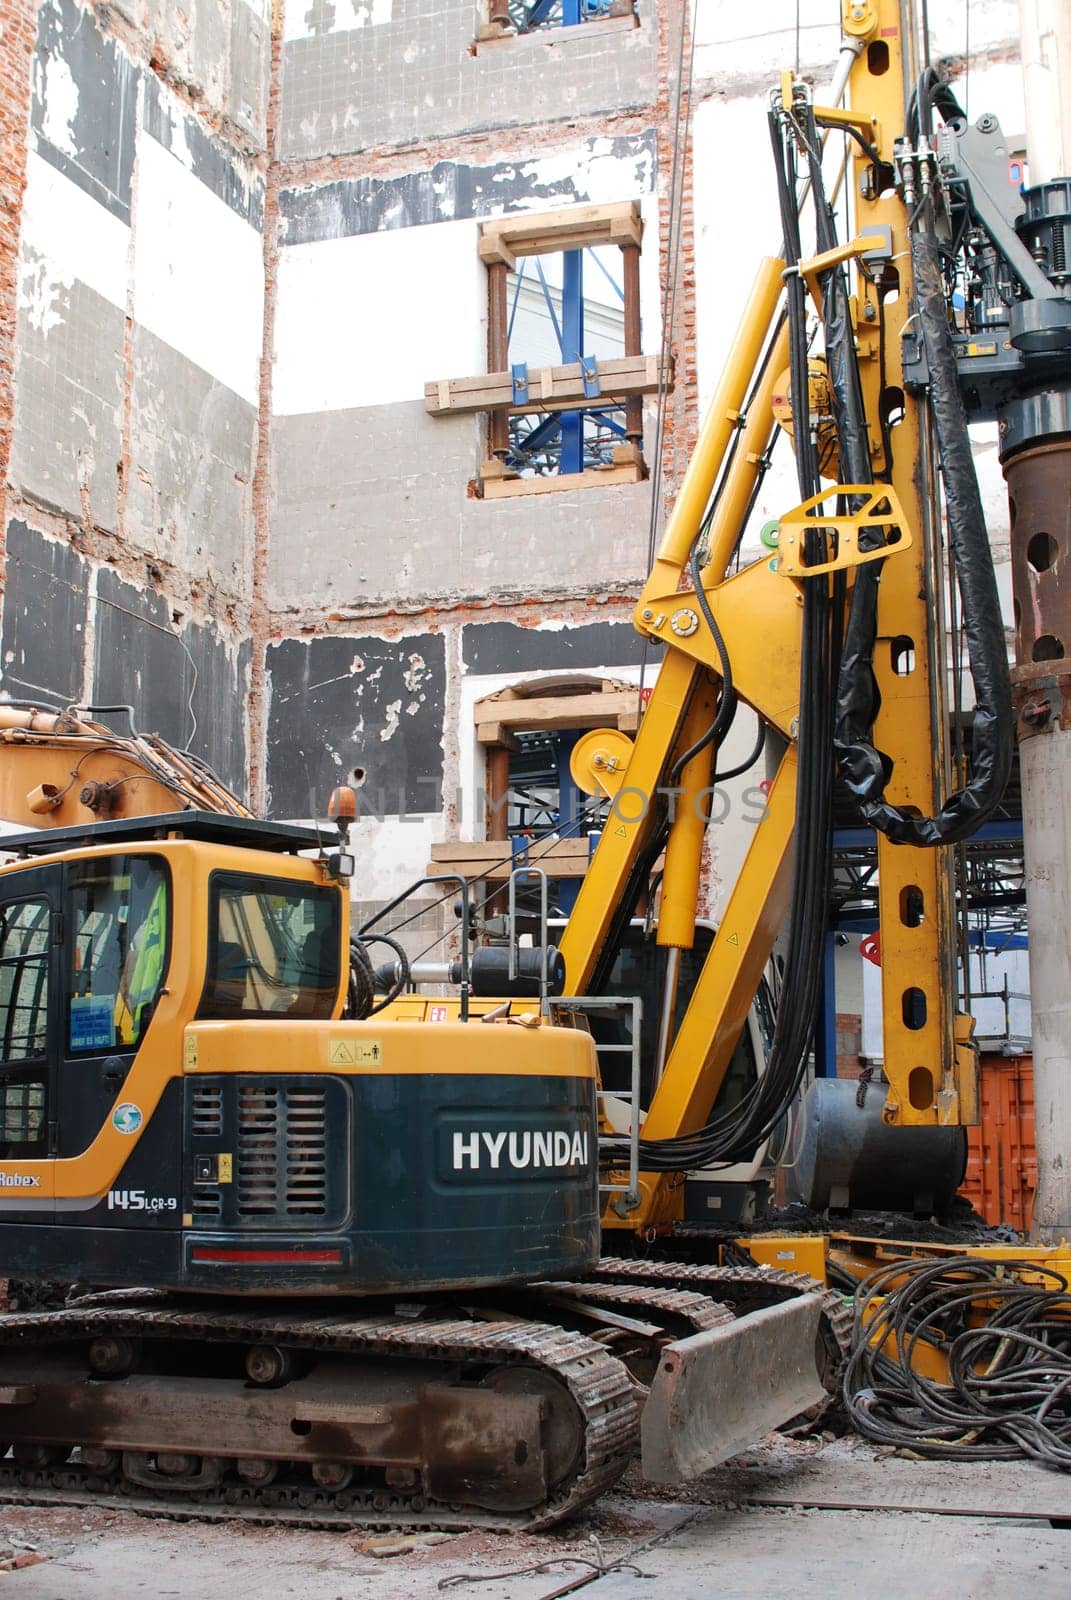 Yellow excavator from Hyundai inside a demolition house in Hamburg at the inner Alster lake